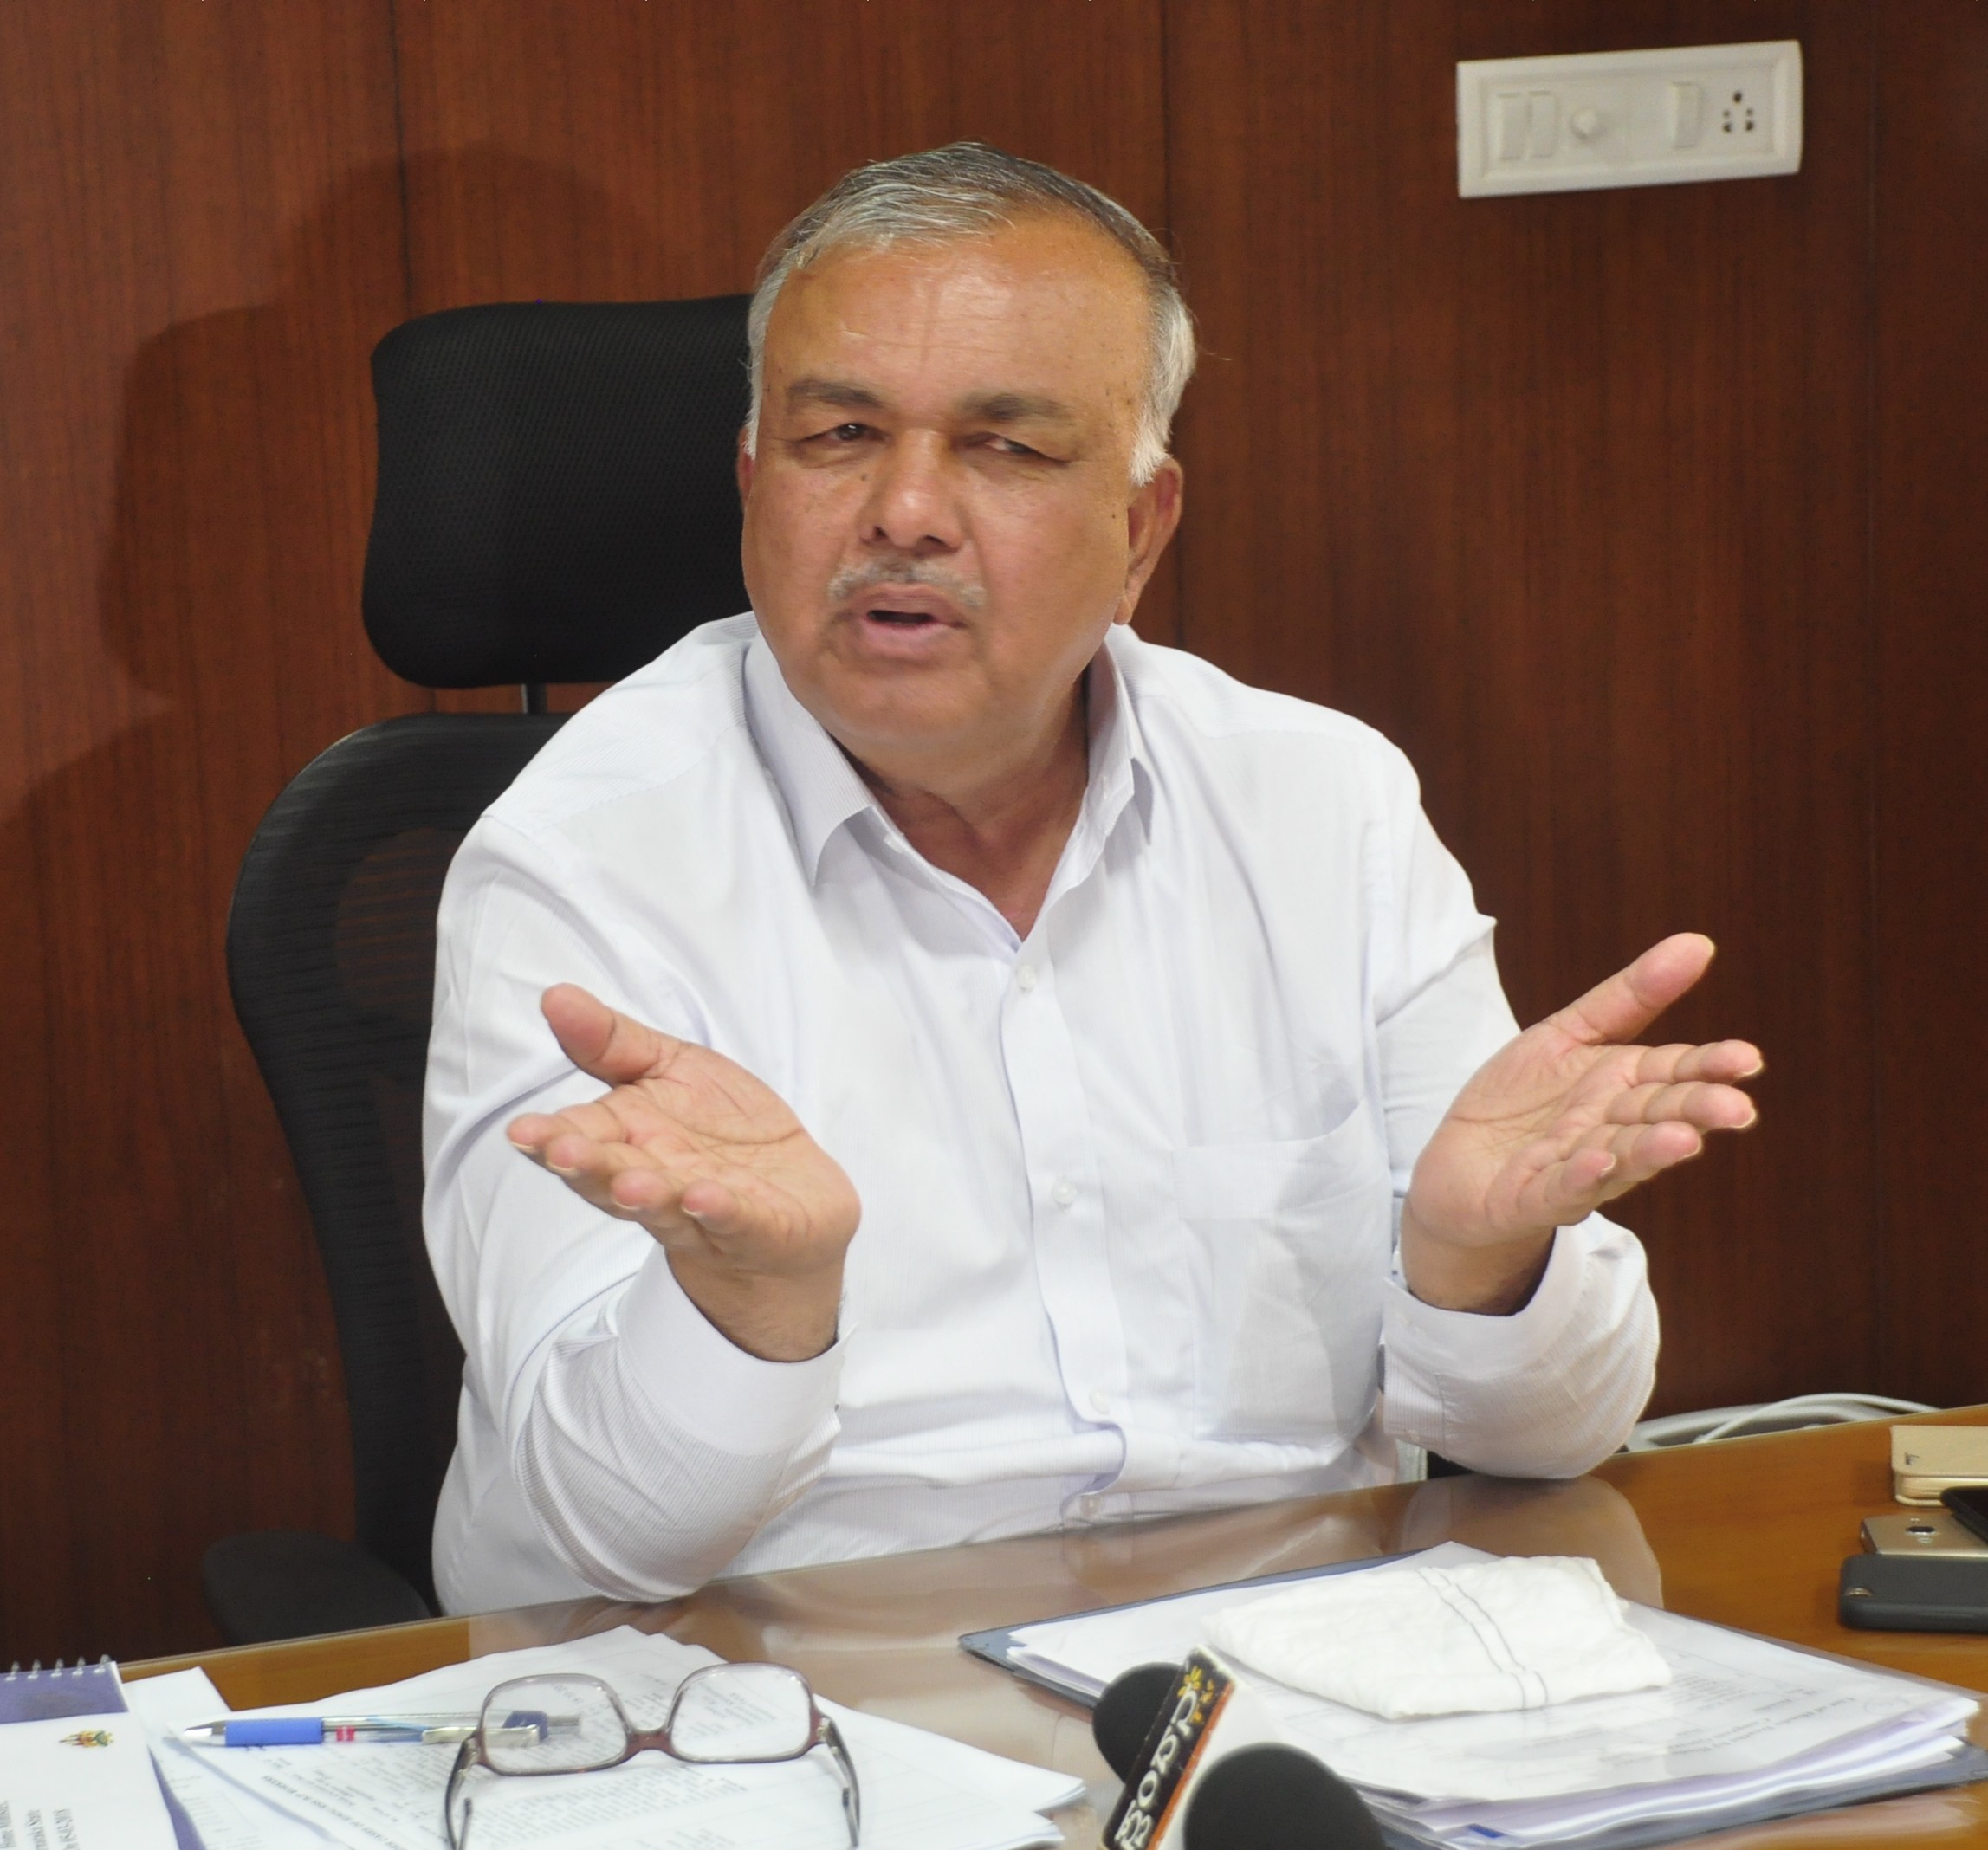 Most of the deaths of Hindus in the state due to various non-communal reasons - Ramalinga Reddy, Home Minister